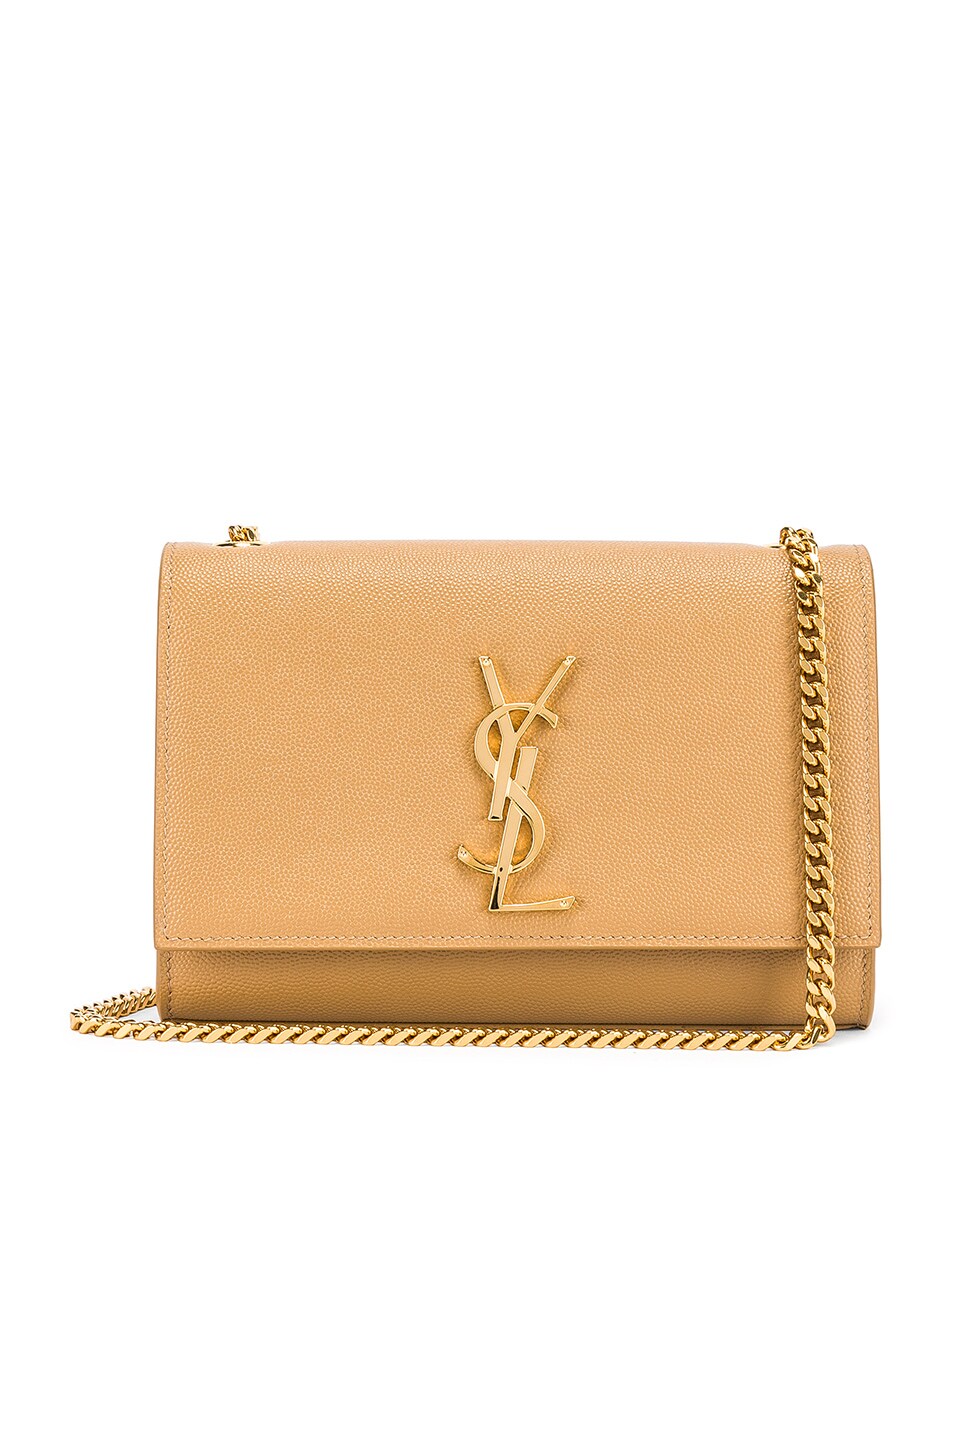 Image 1 of Saint Laurent Small Kate Monogramme Chain Bag in Toffee